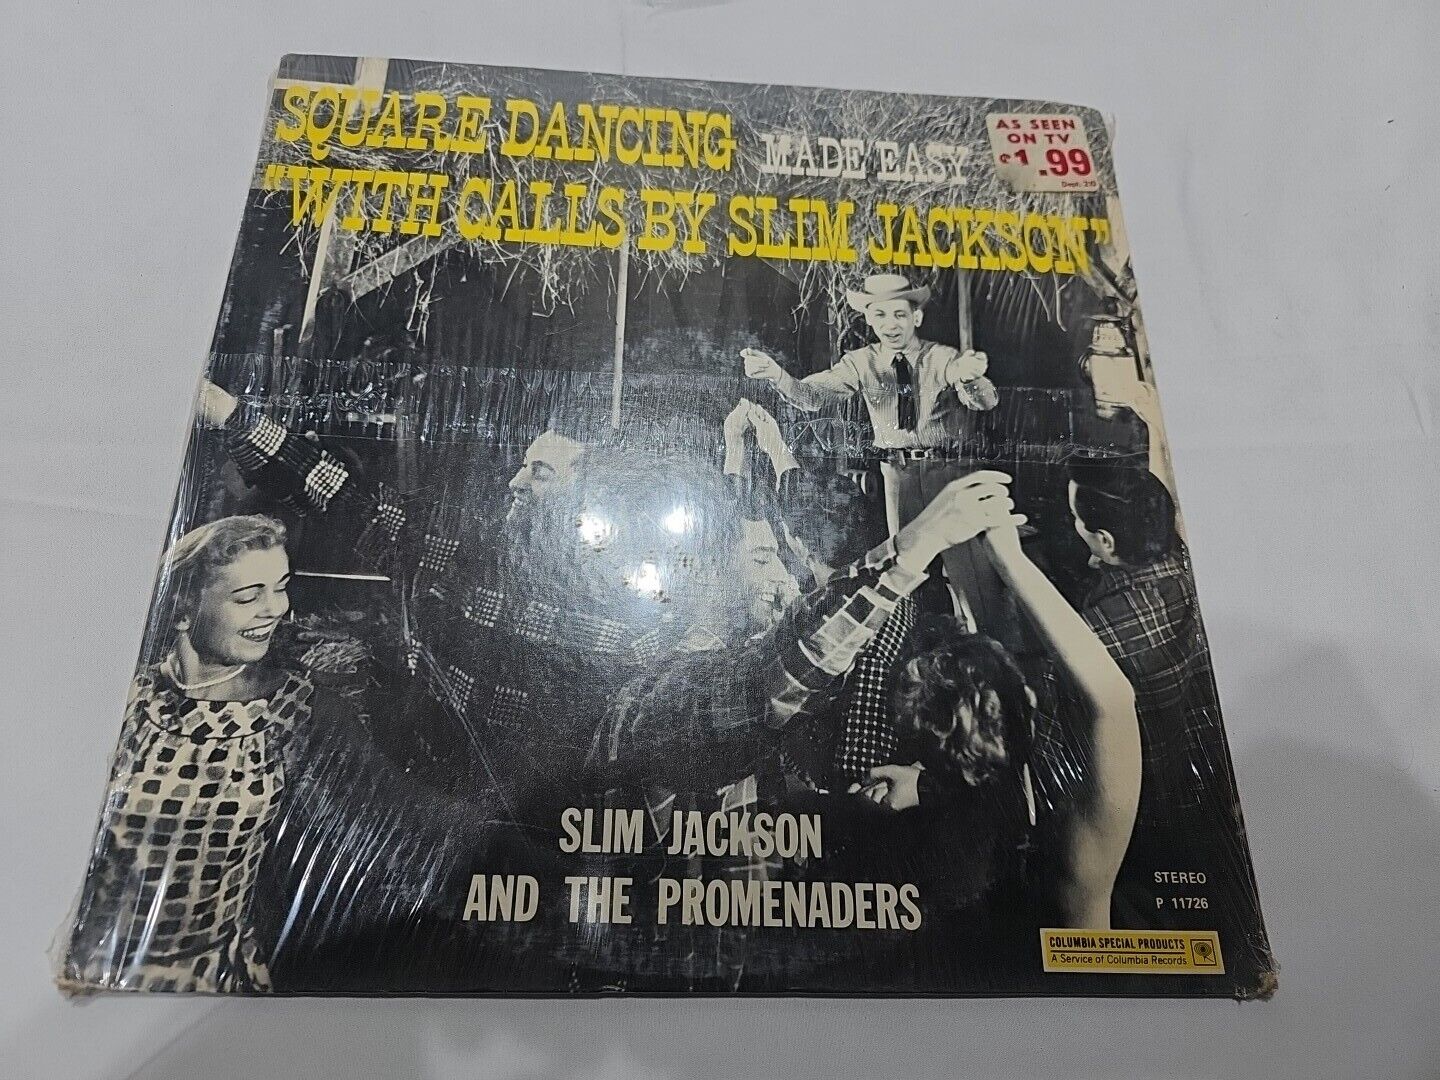 New “Square Dancing Made Easy” (With Calls By Slim Jackson) Vinyl LP~Sealed